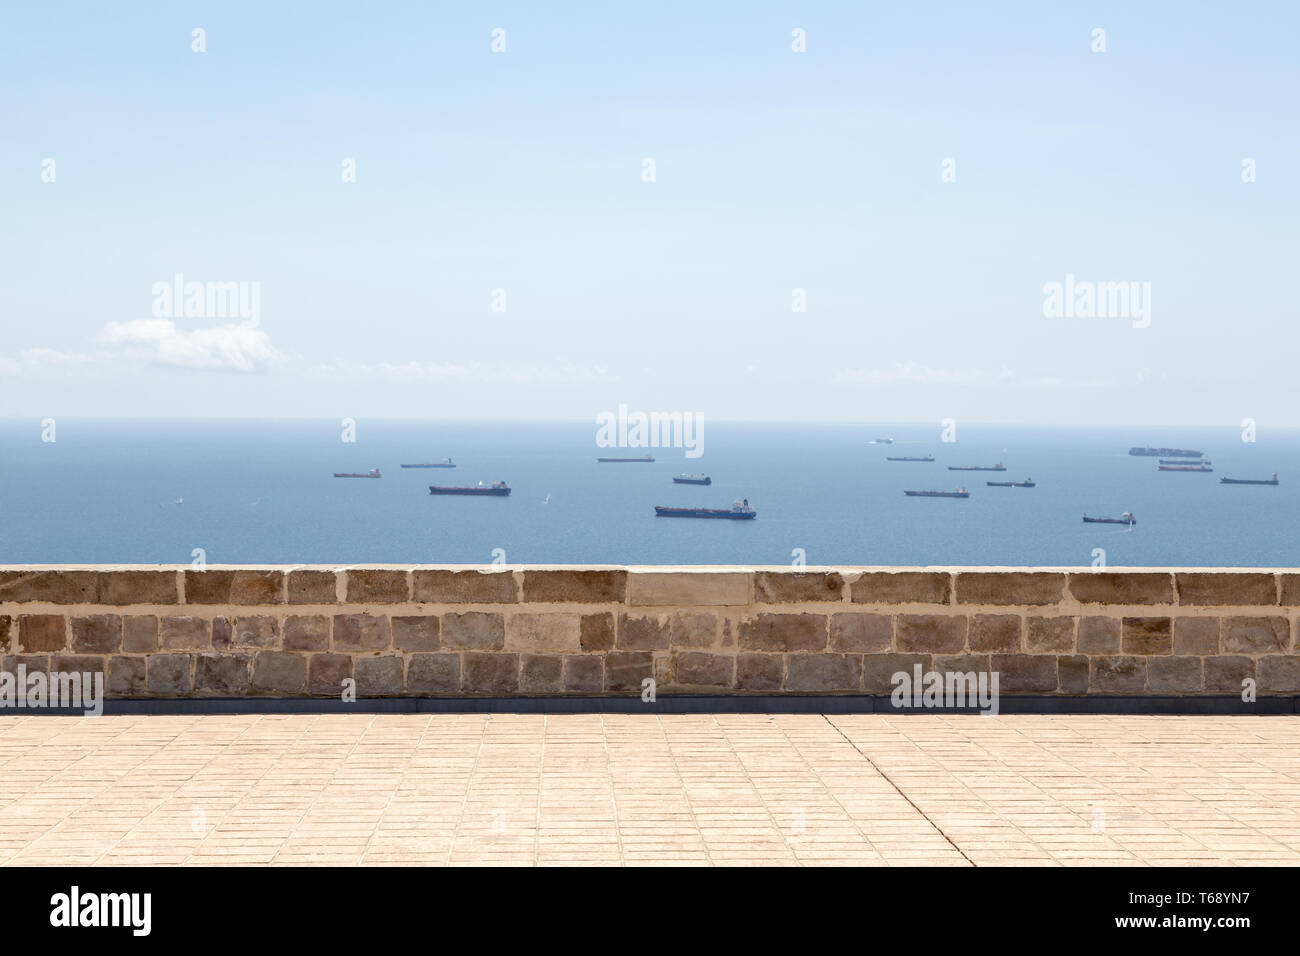 ancient wall with fleet of tankers behind Stock Photo